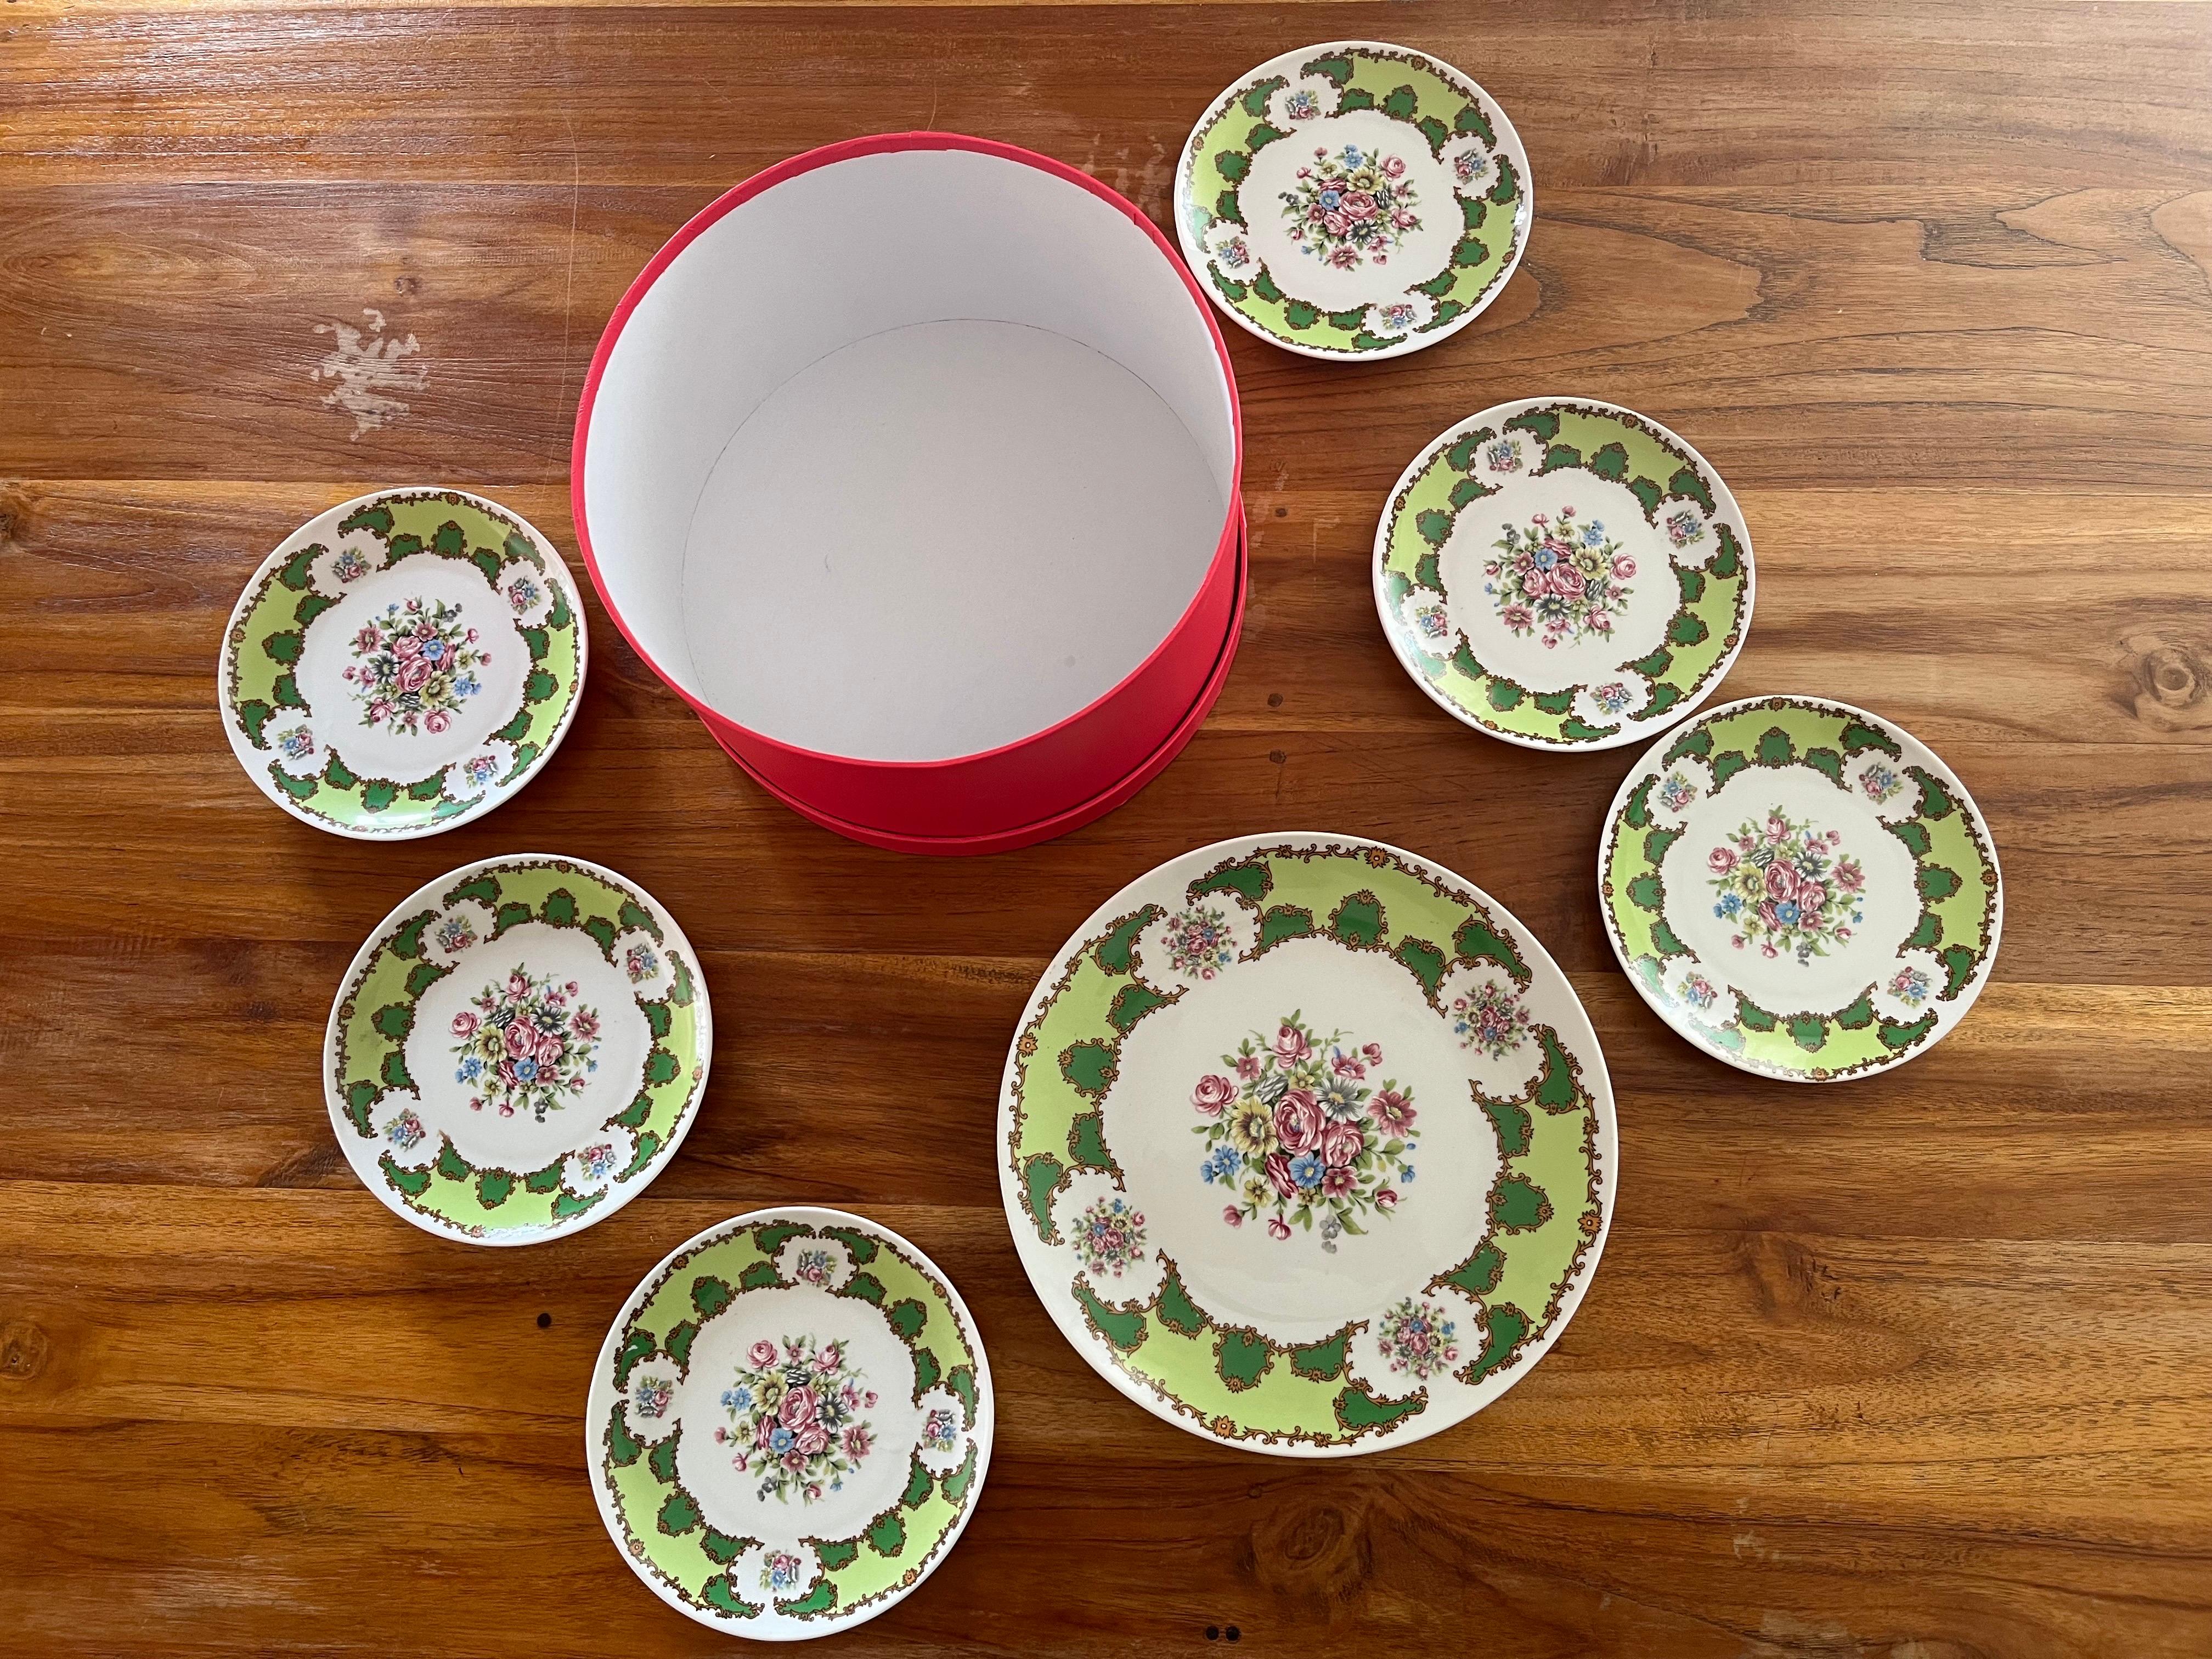 Coordinated Dessert Green Decorated Porcelain '900 -Antiques' For Sale 2